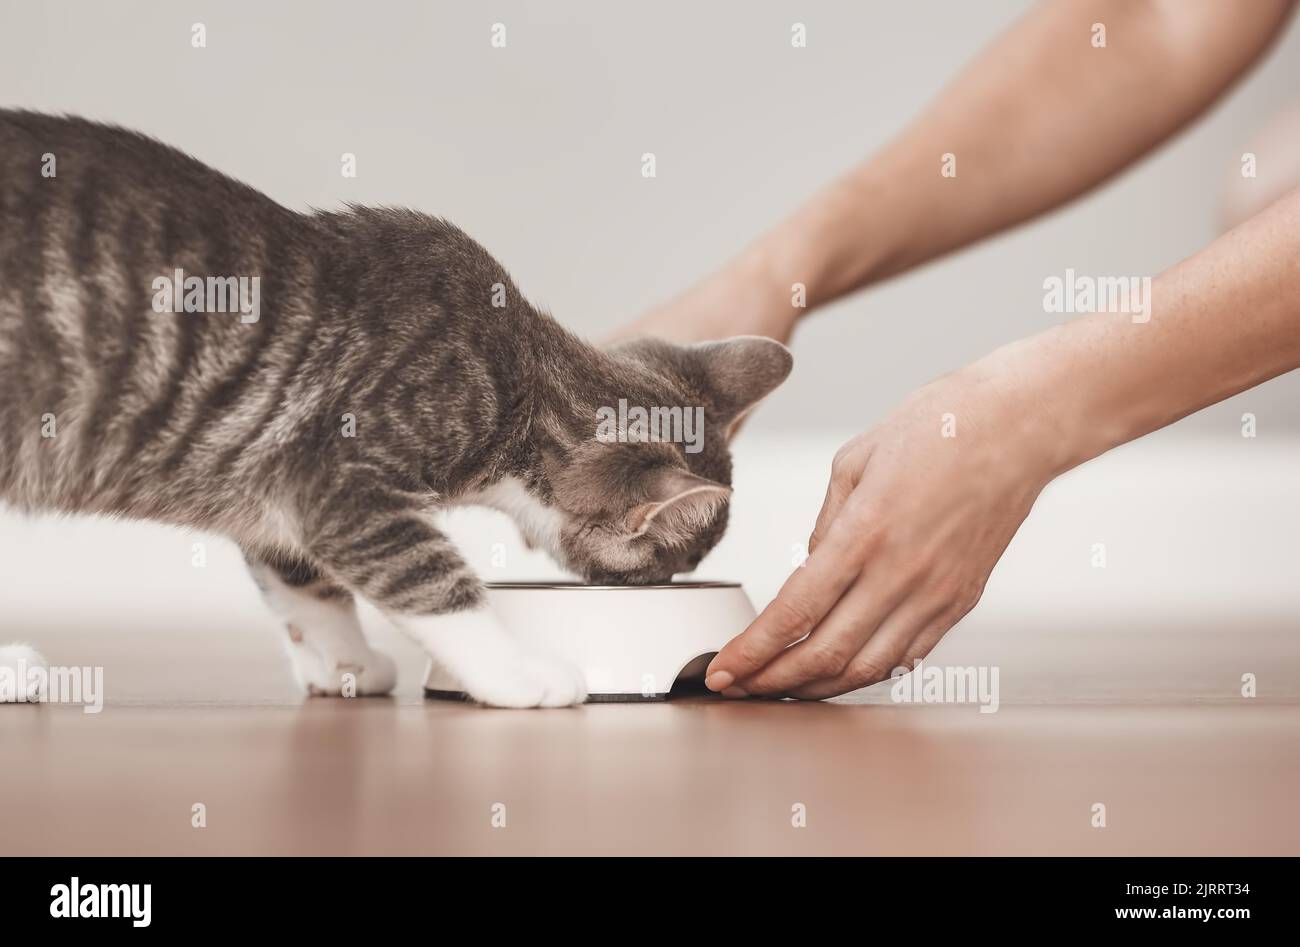 Woman feeding grey kitten by cat's meal indoors. Stock Photo